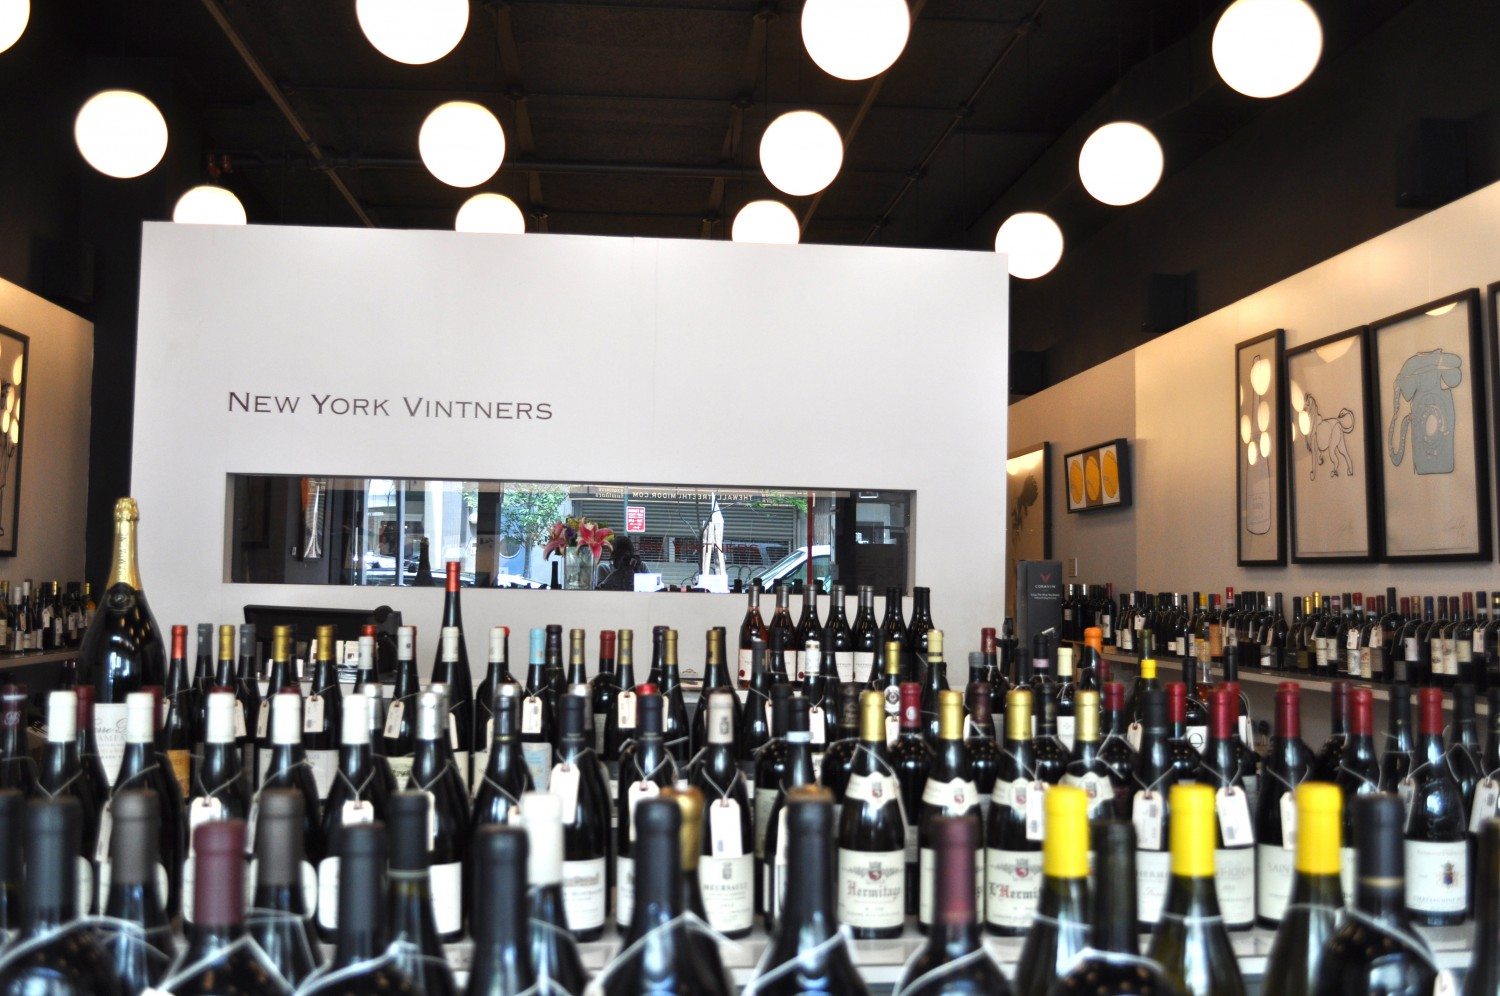 Get the Ultimate Wine Tasting Experience with New York Vintners